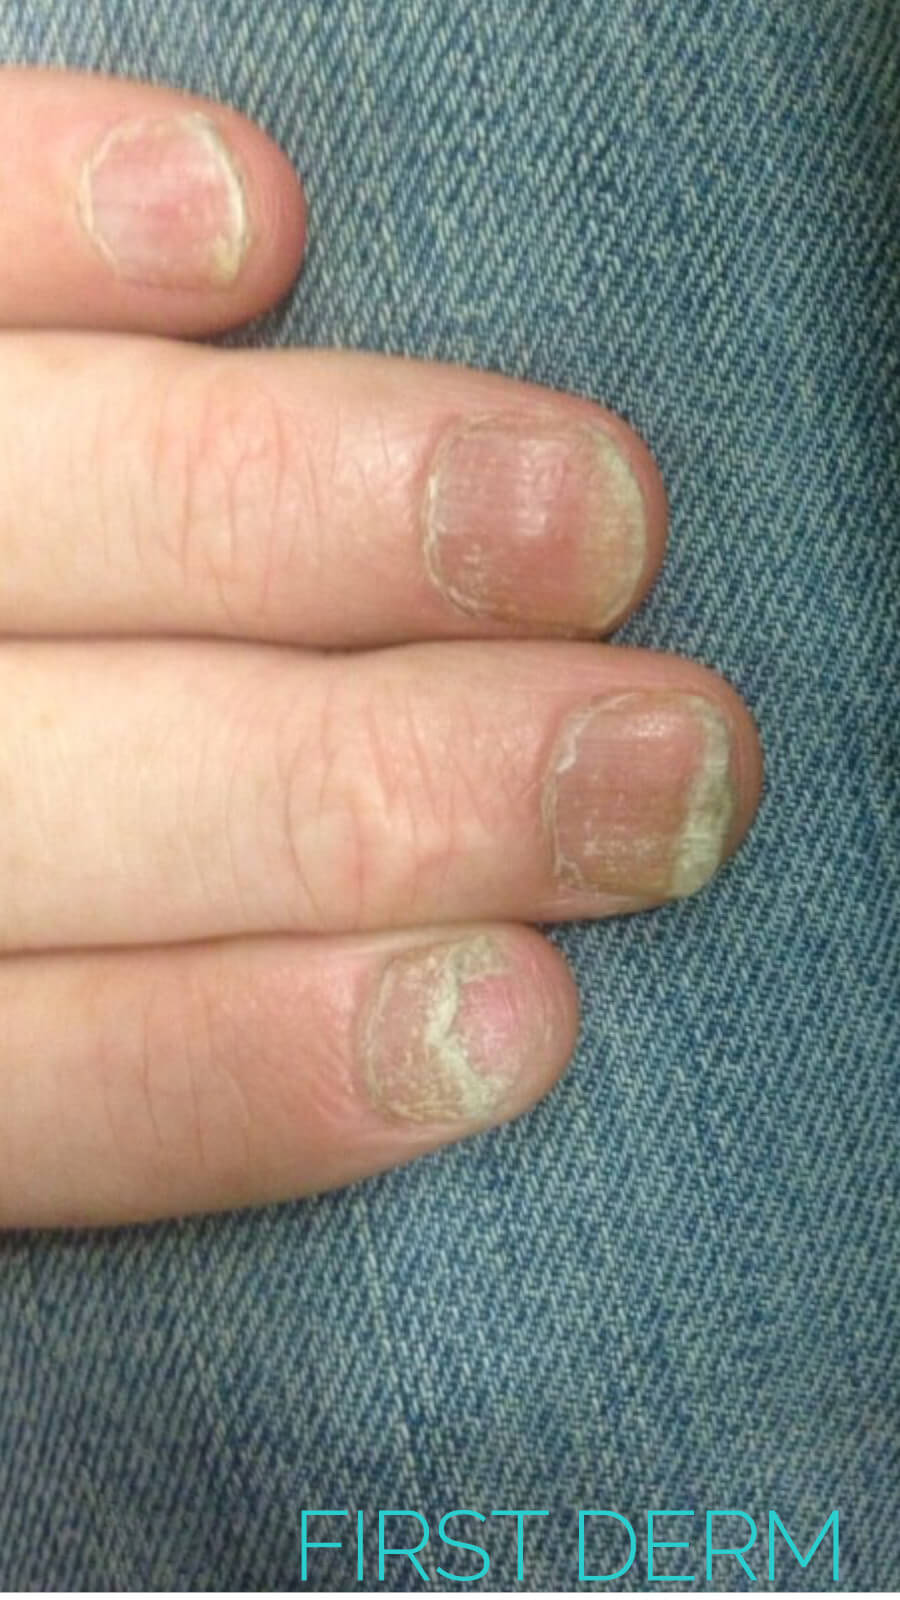 Brittle Nails | Causes, Symptoms, and Treatments, | DSCI